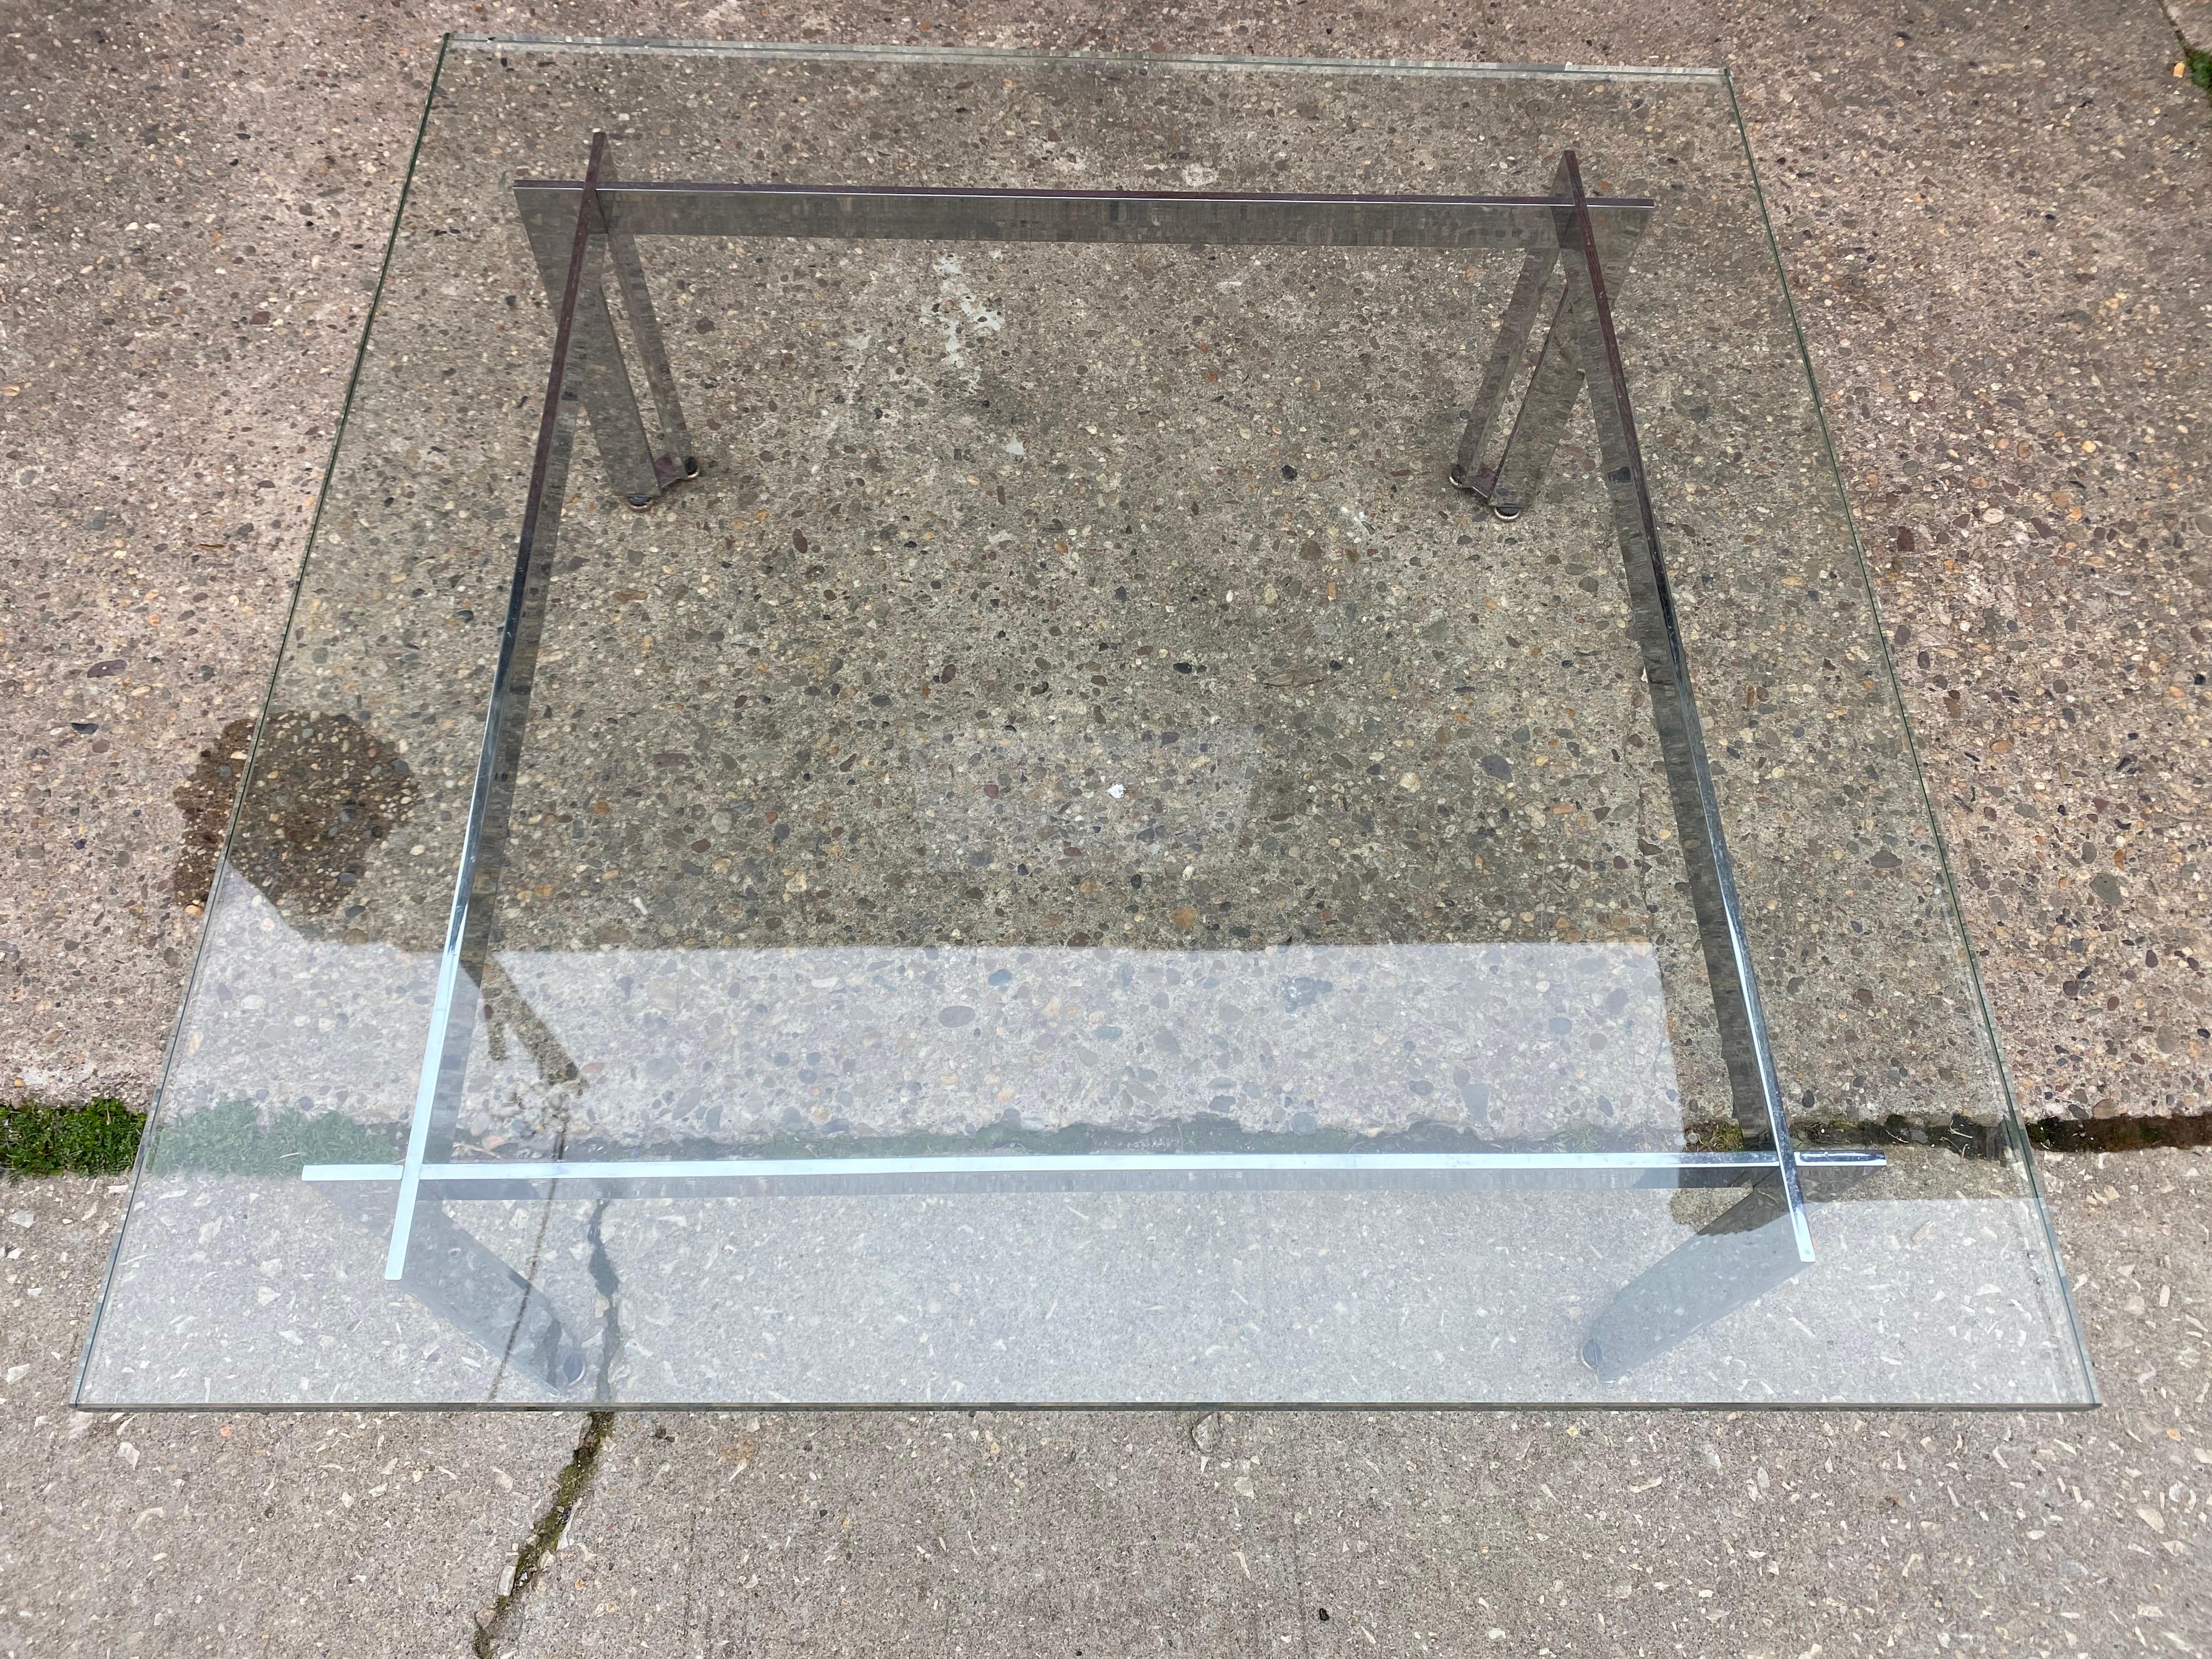 James Howell for Tri-Mark Chrome and Glass Coffee Table.  Elegant design with a corner crossing leg.  Very Sleek and Simple!  This design is sometimes seen as a dining table as well.  2 small chips to glass as seen in photos.